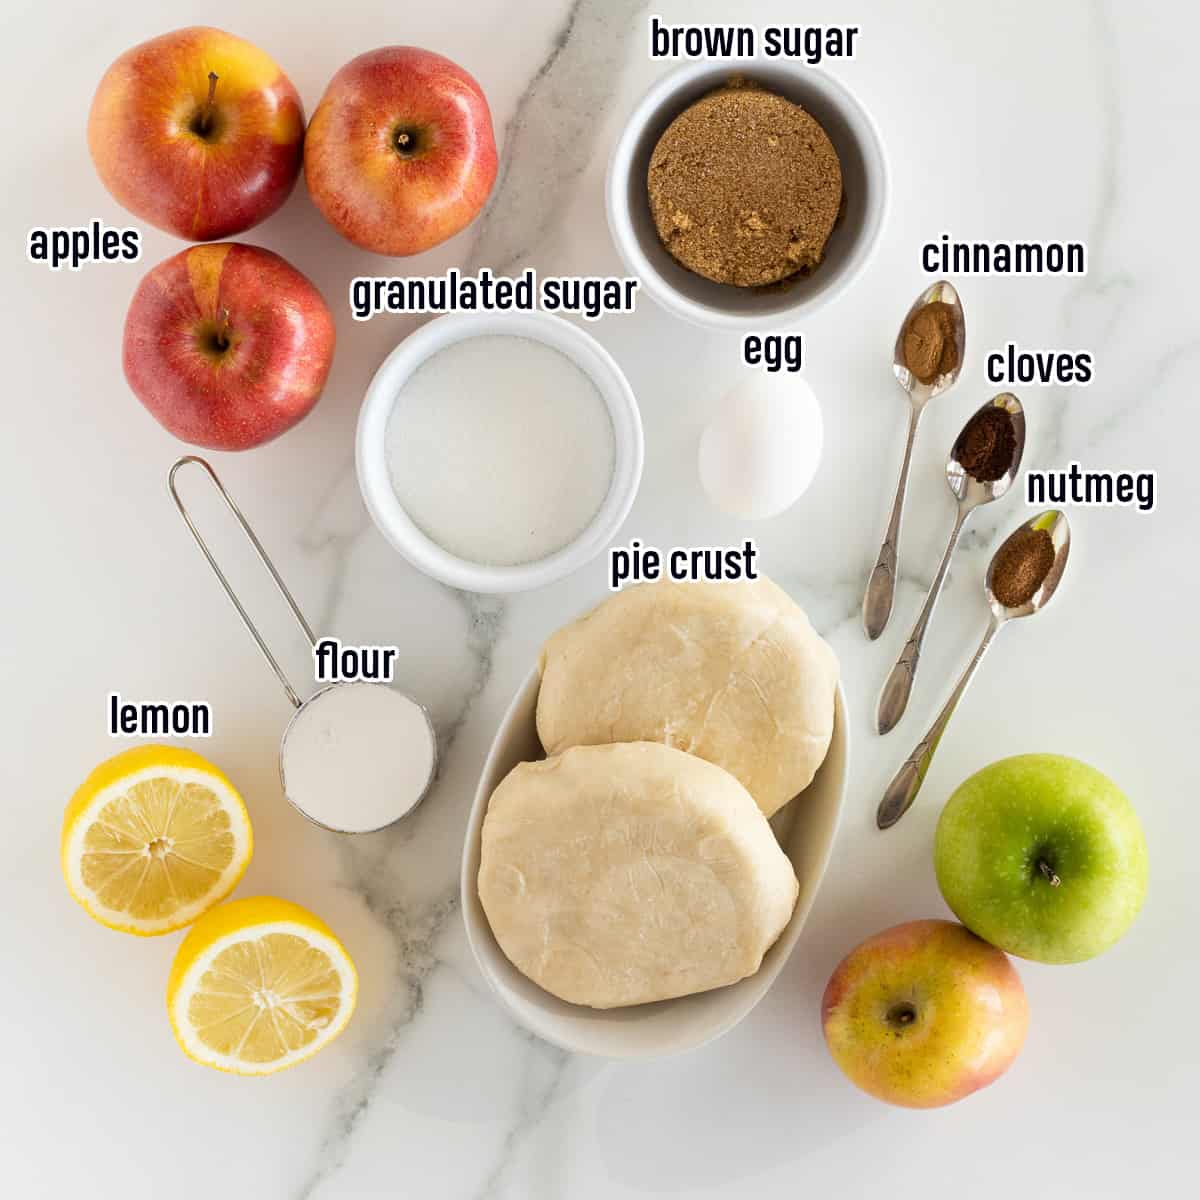 Apples, brown sugar, pie crust and other apple pie ingredients with text.